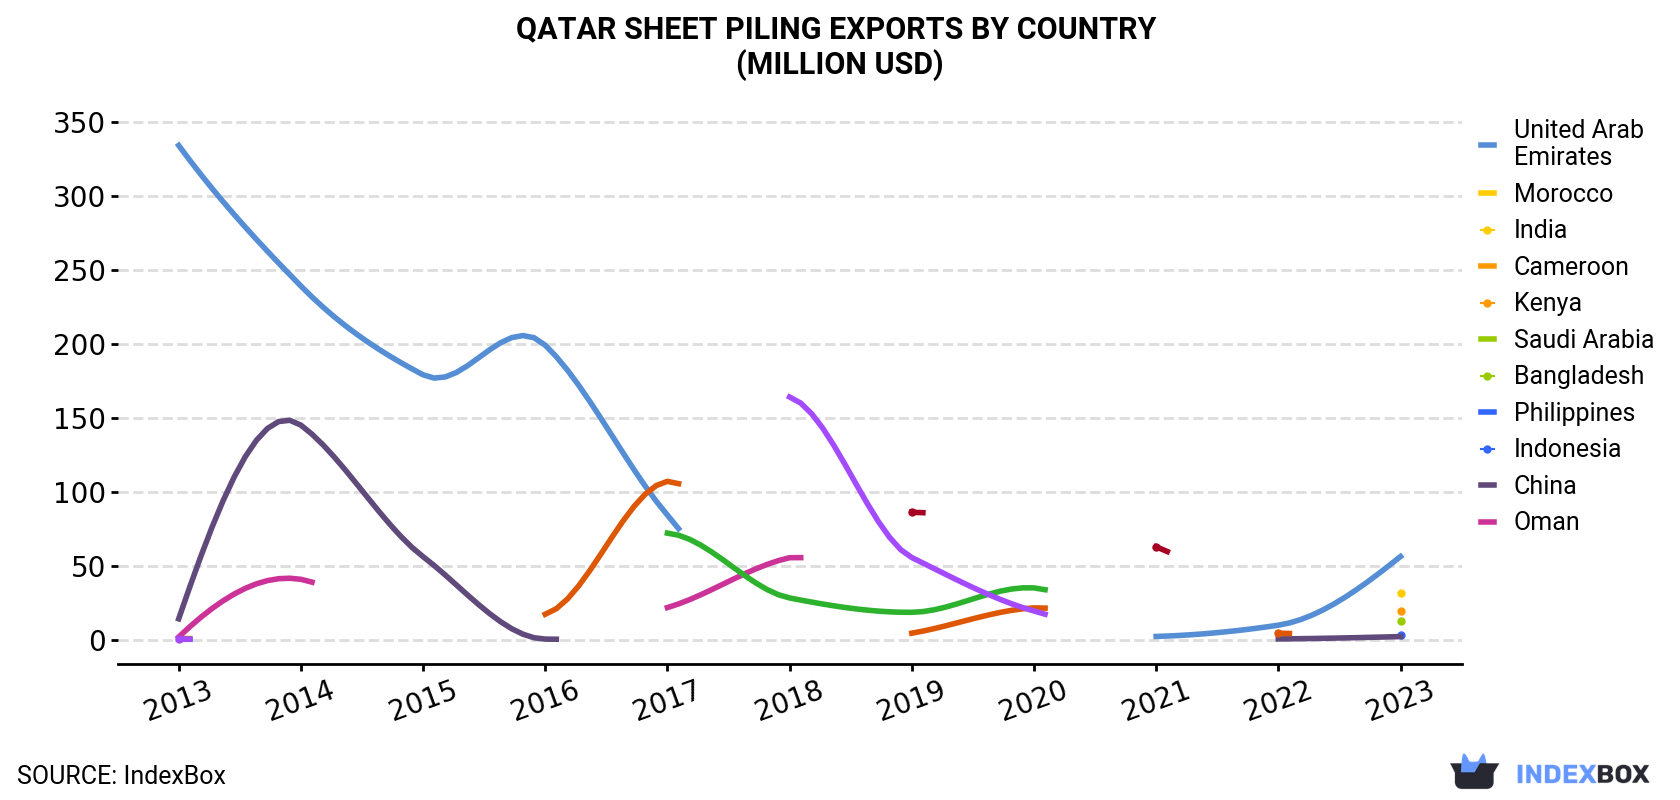 Qatar Sheet Piling Exports By Country (Million USD)